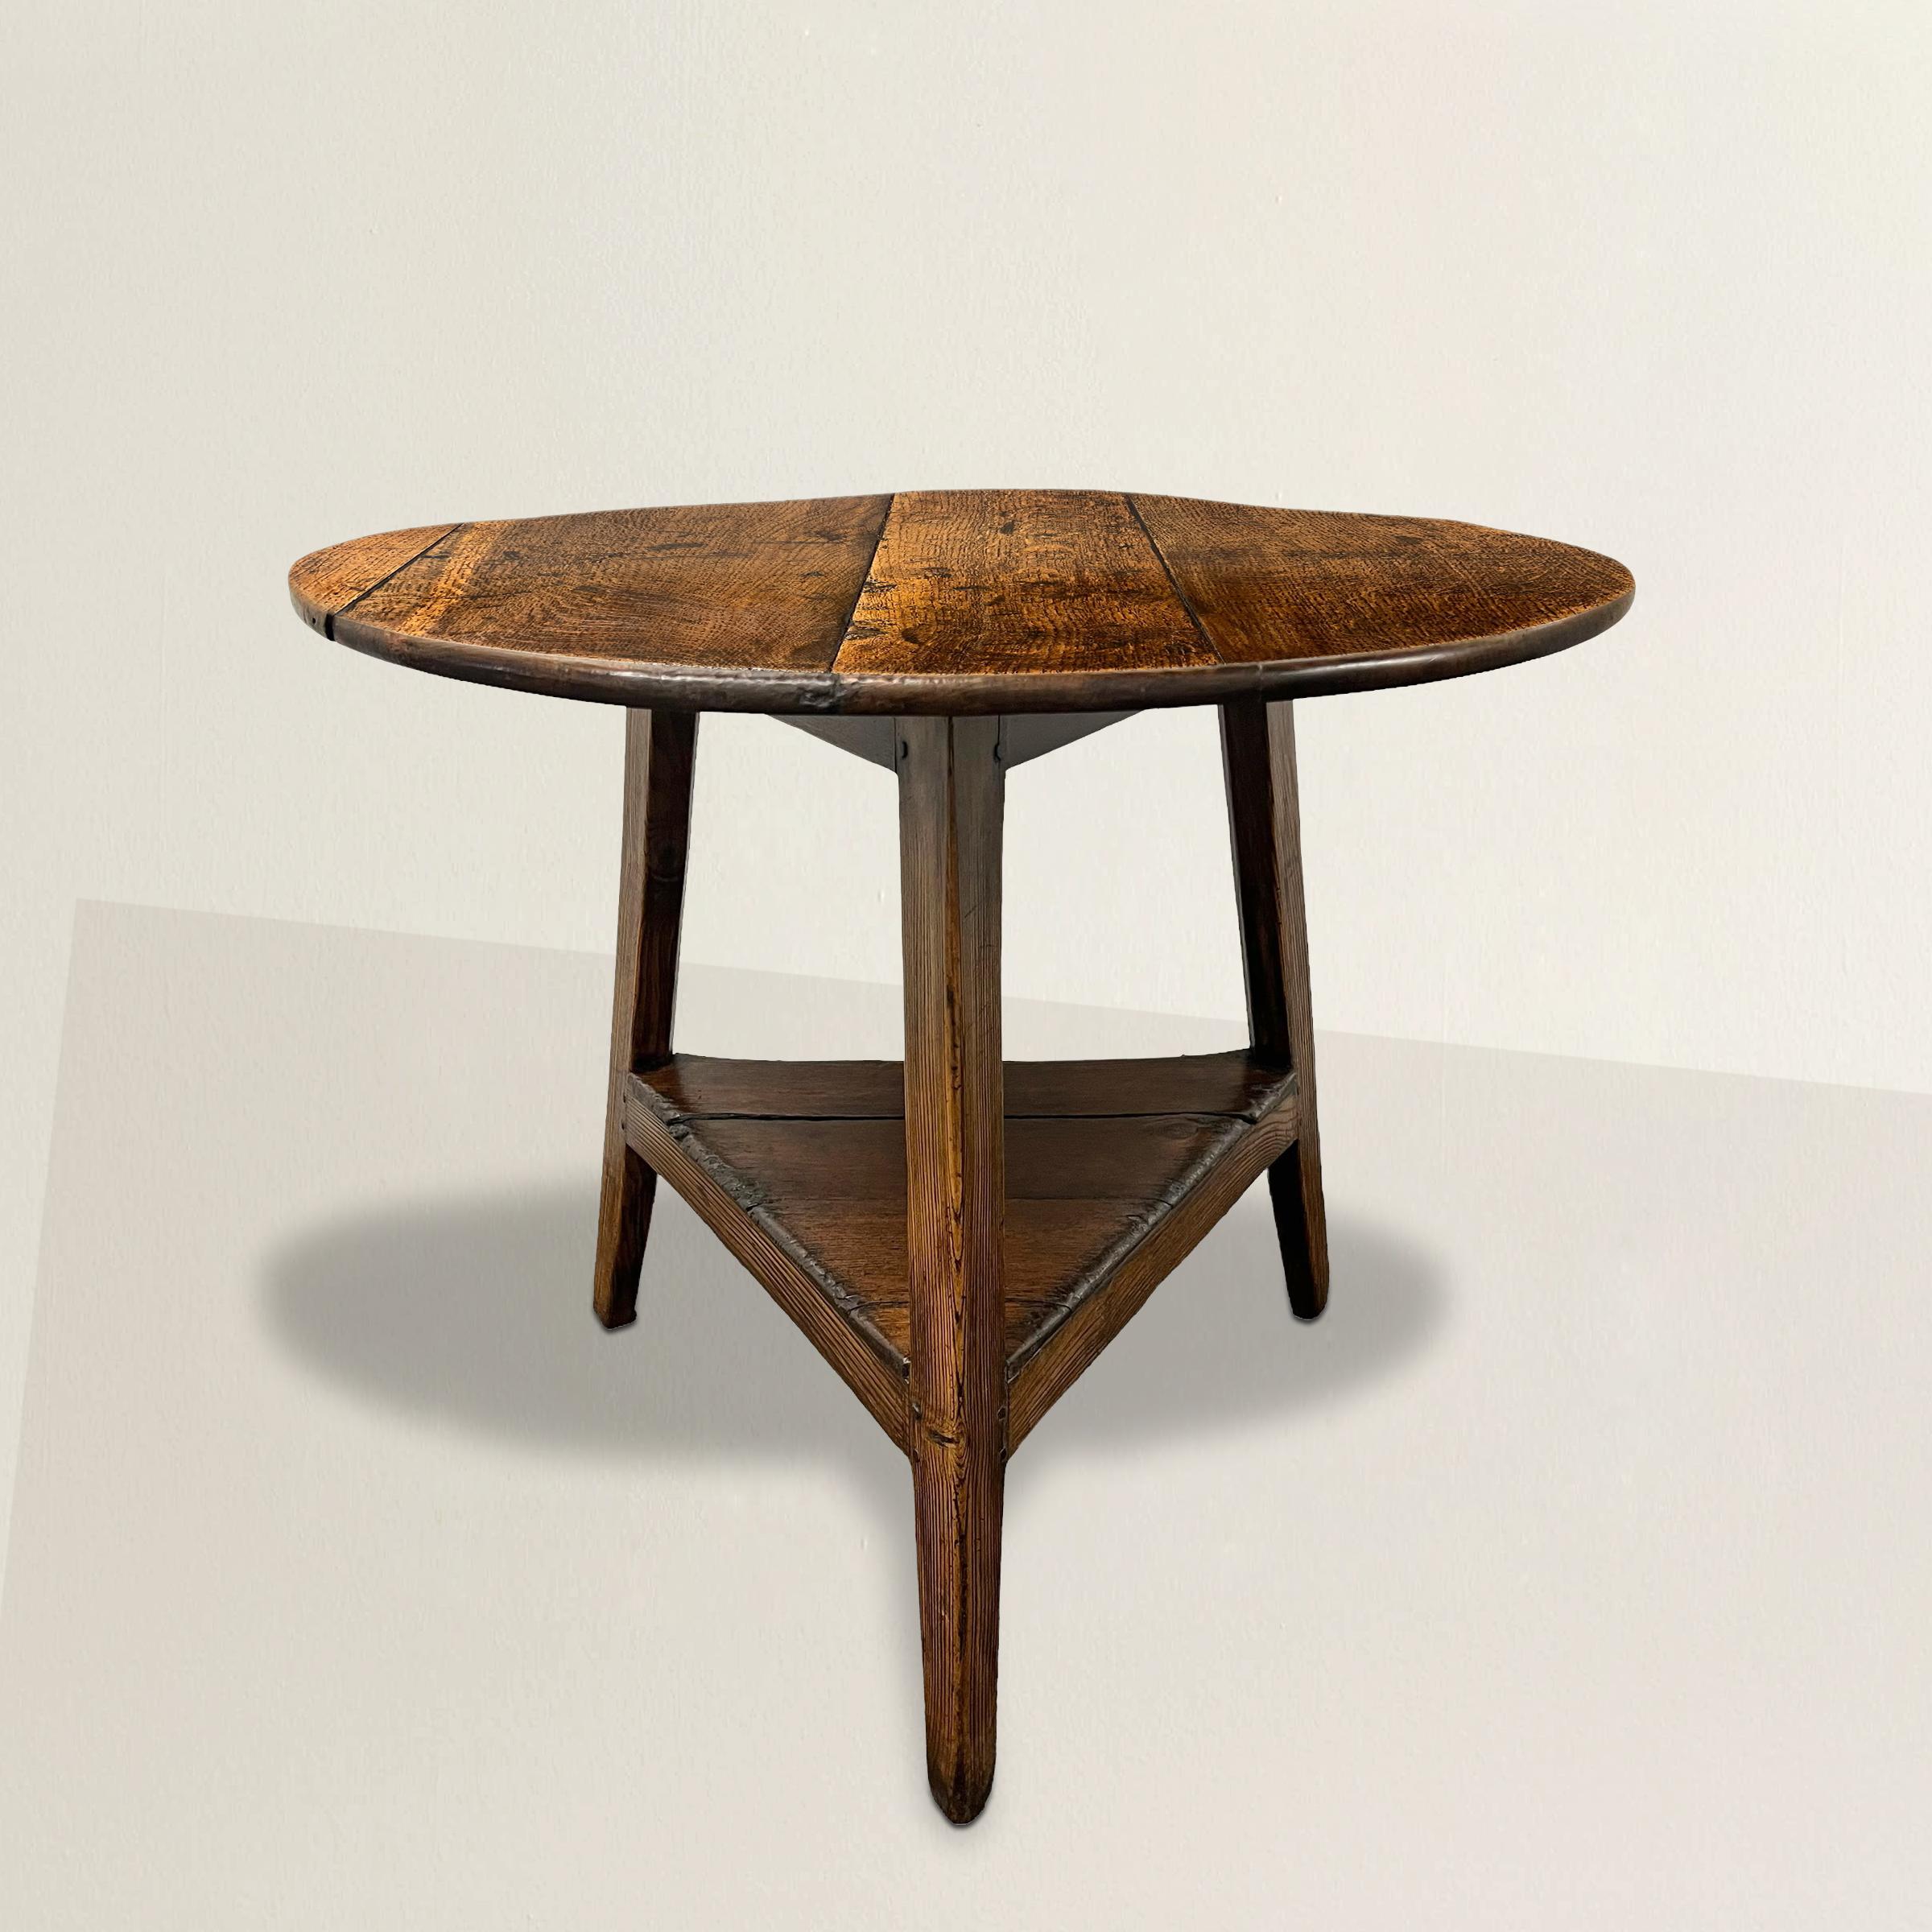 Standing as a testament to 18th-century English craftsmanship, this exceptional elmwood cricket table is a captivating piece of furniture. Its round top boasts a patina that tells the tale of years gone by. Supported by three elegantly tapered legs,